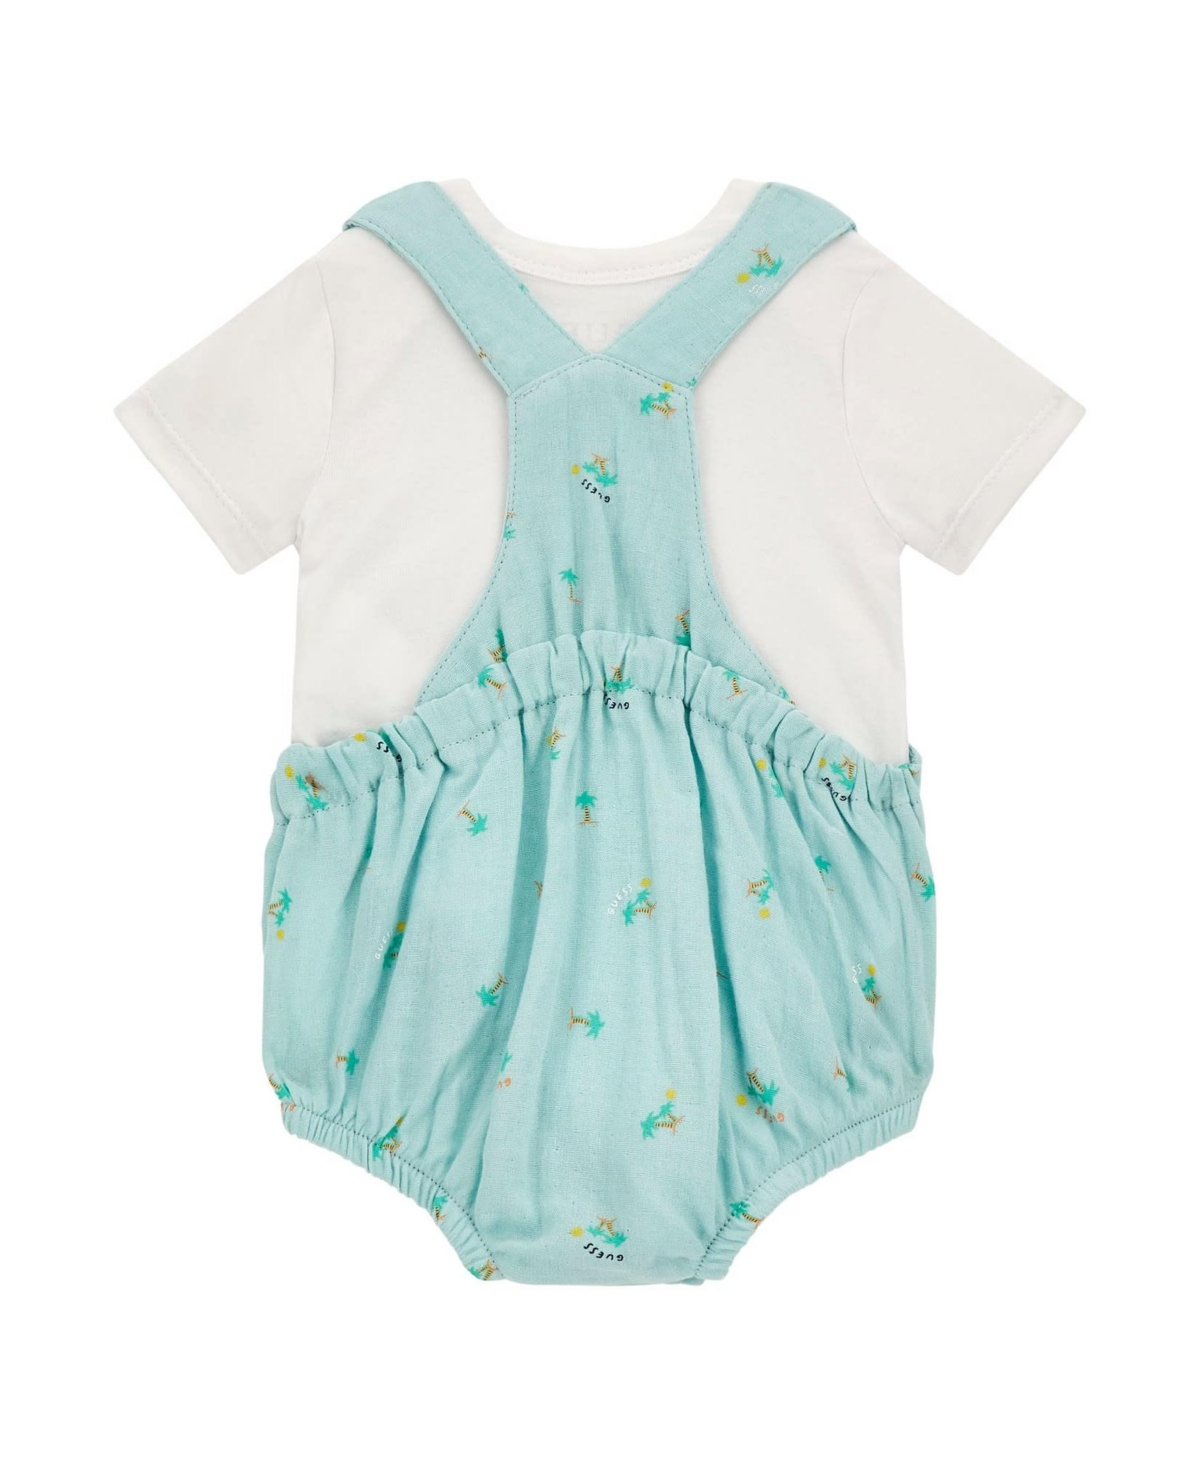 Shop Guess Baby Boy Bodysuit And Bubble Coverall In White